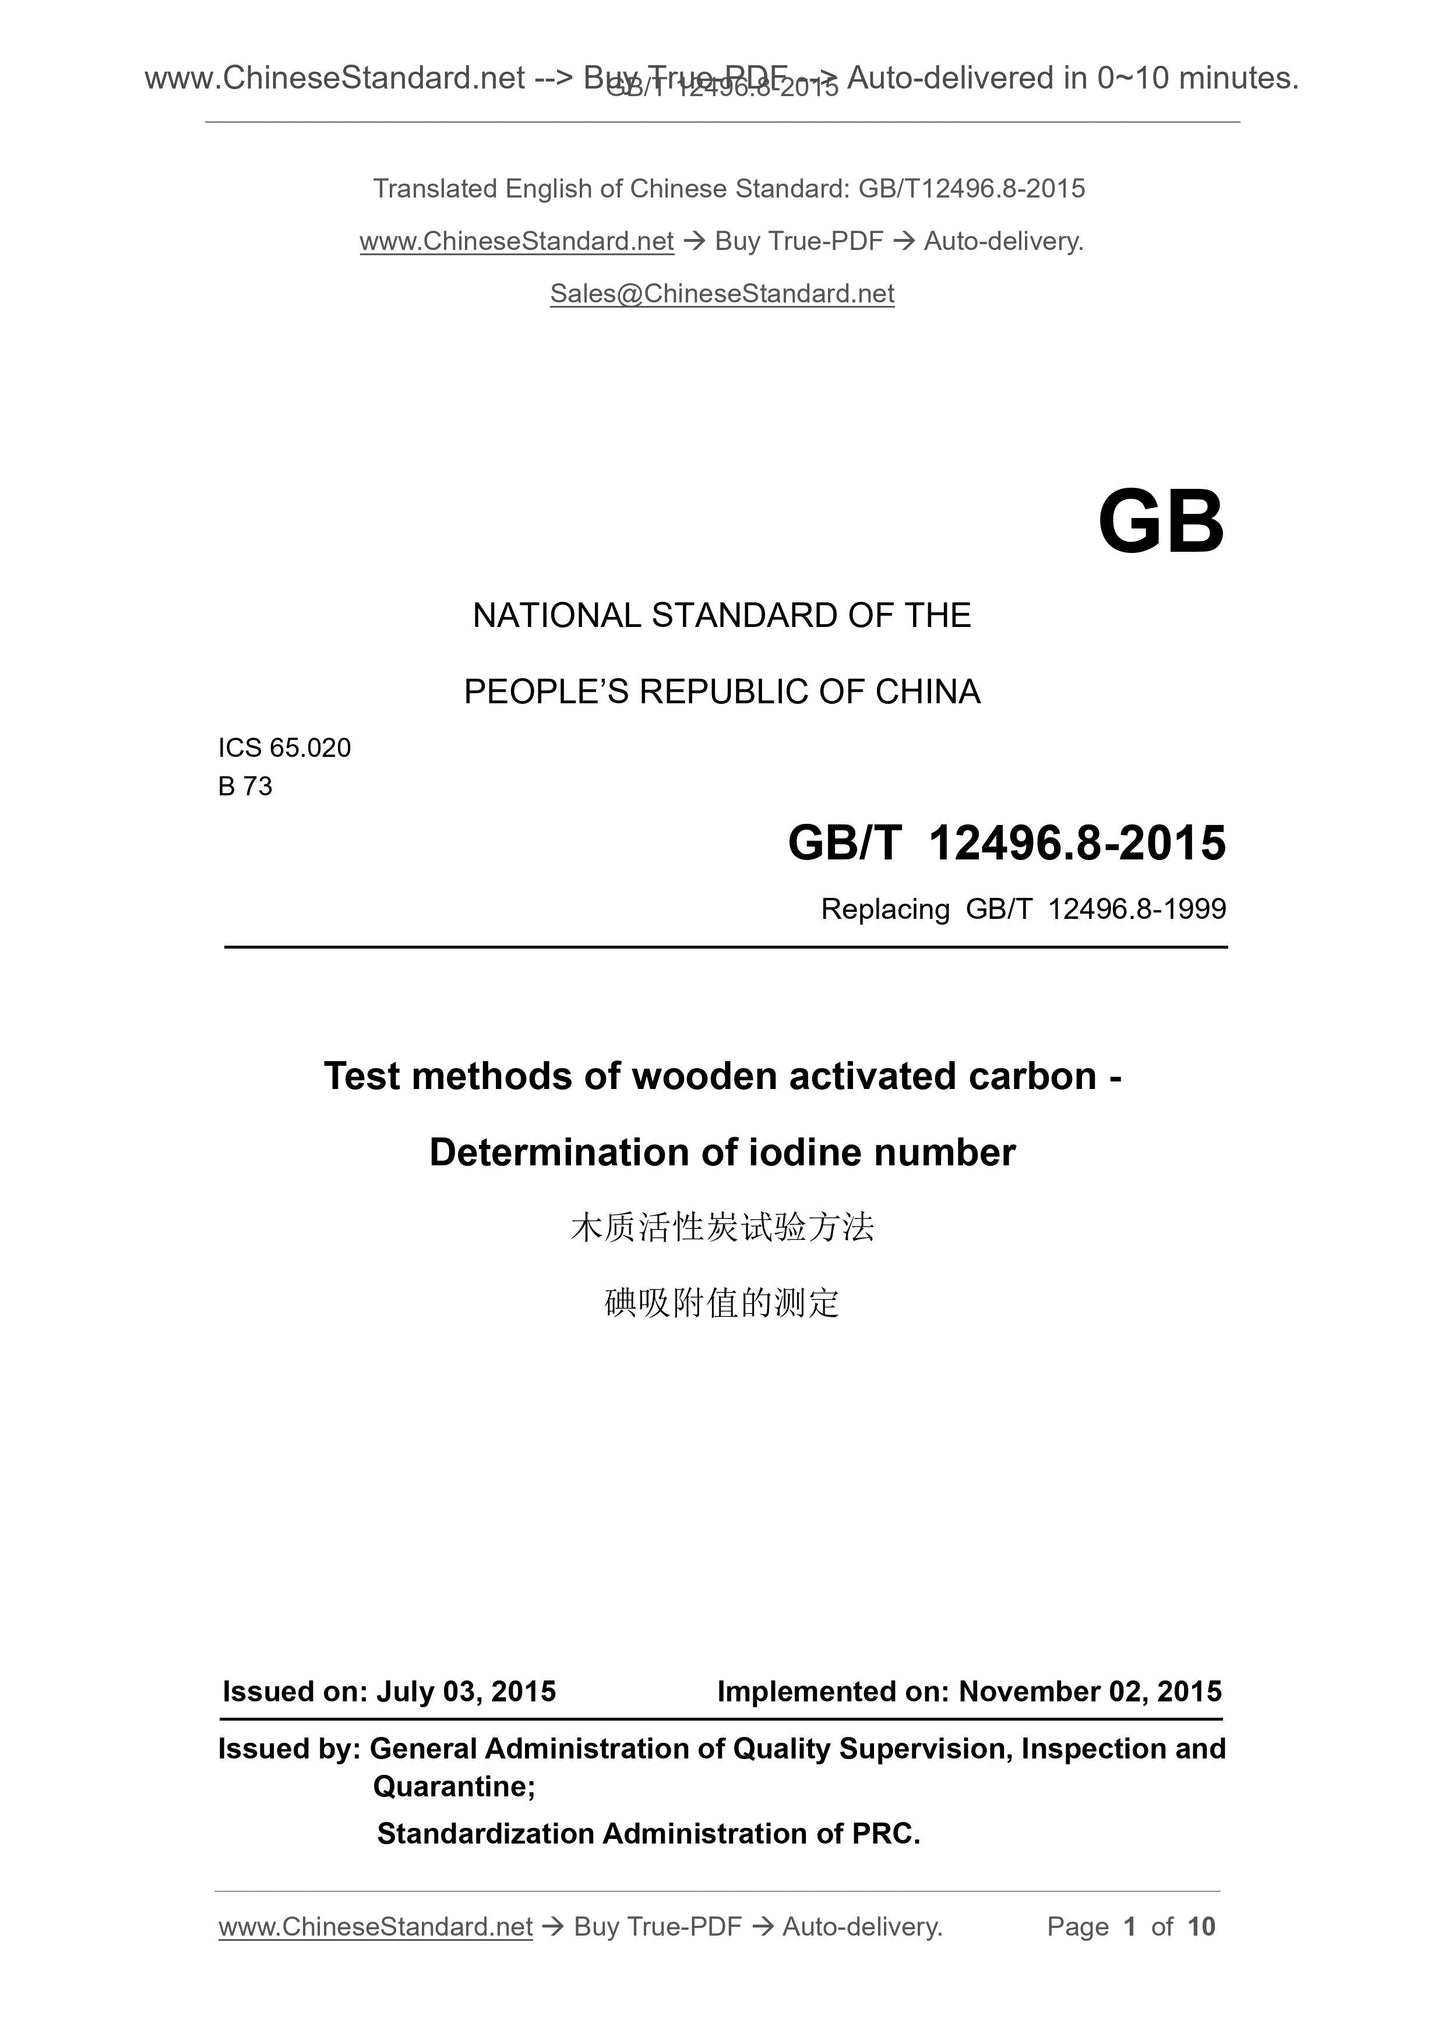 GB/T 12496.8-2015 Page 1